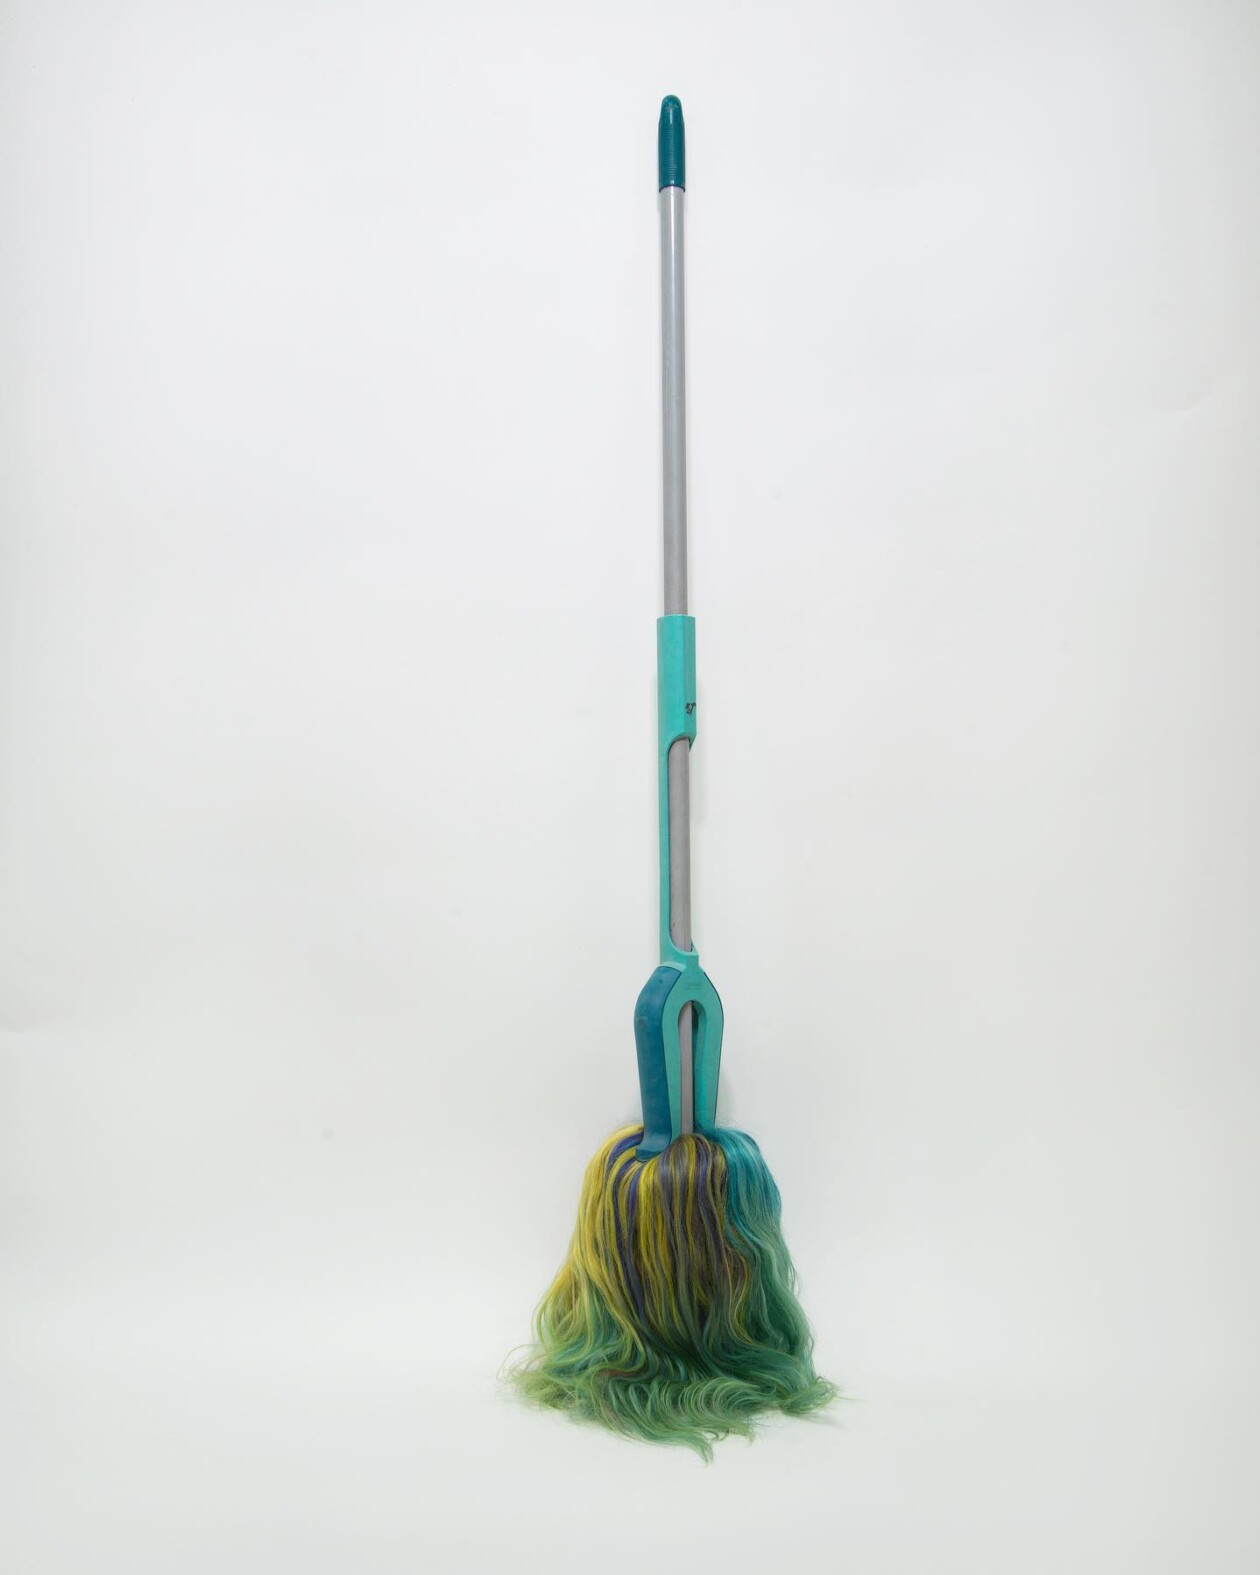 After The Waves (the Waifs) Surreal Sculptures Of Brooms With Human Hairs By Vincent Olinet (10)